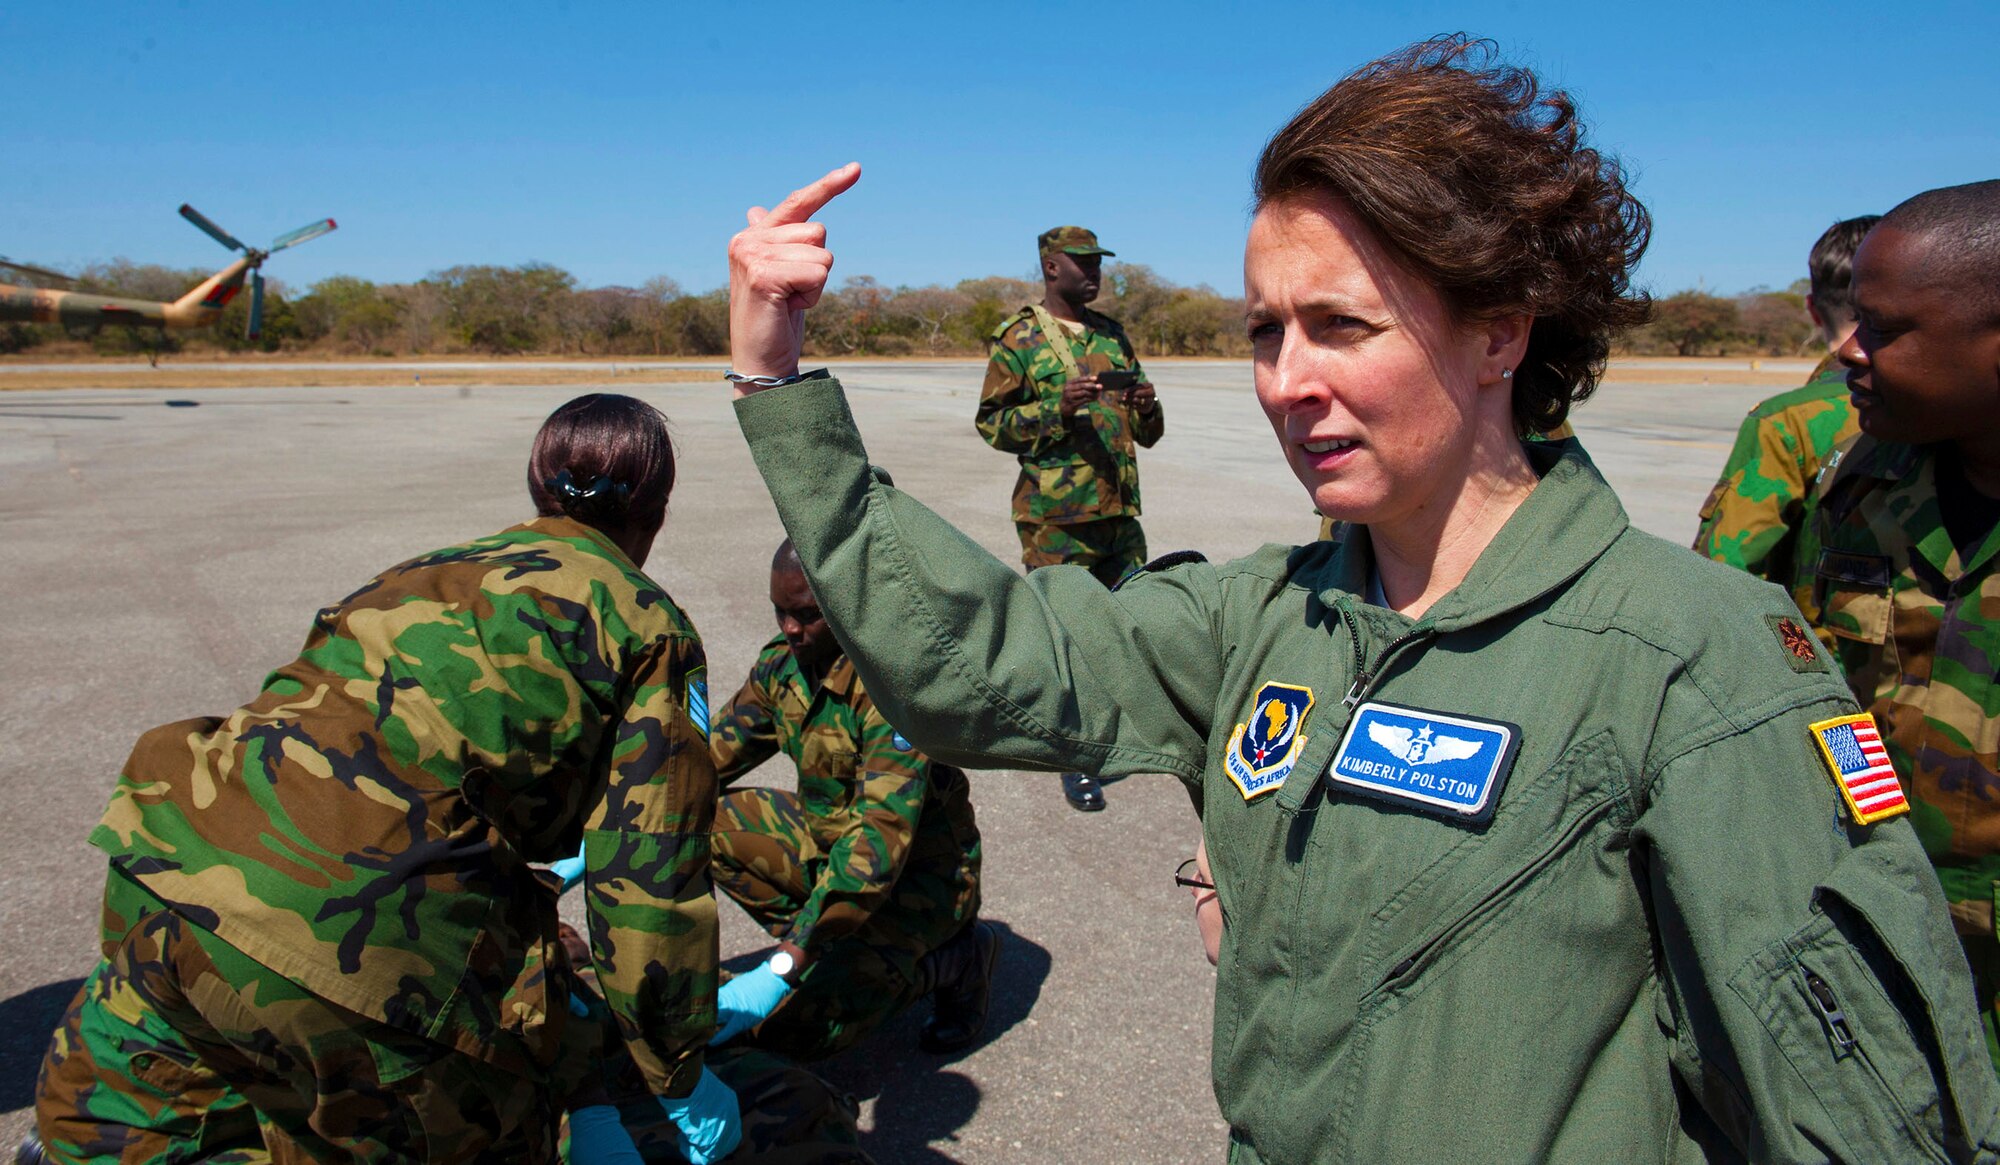 U.S. Air Force Maj. Kimberly Polston, a flight nurse with the United States Air Forces in Europe Surgeon Generals Office, signals a medical team to start an evacuation during an training at Southern Accord 2015 in Lusaka, Zambia. The annual exercise provides U.S. military, United Nations allies and Zambian Defense Forces an opportunity to work and train together as a joint, combined peacekeeping allied force. (U.S. Army Africa photo by U.S. Air Force Staff Sgt. Brian Kimball)